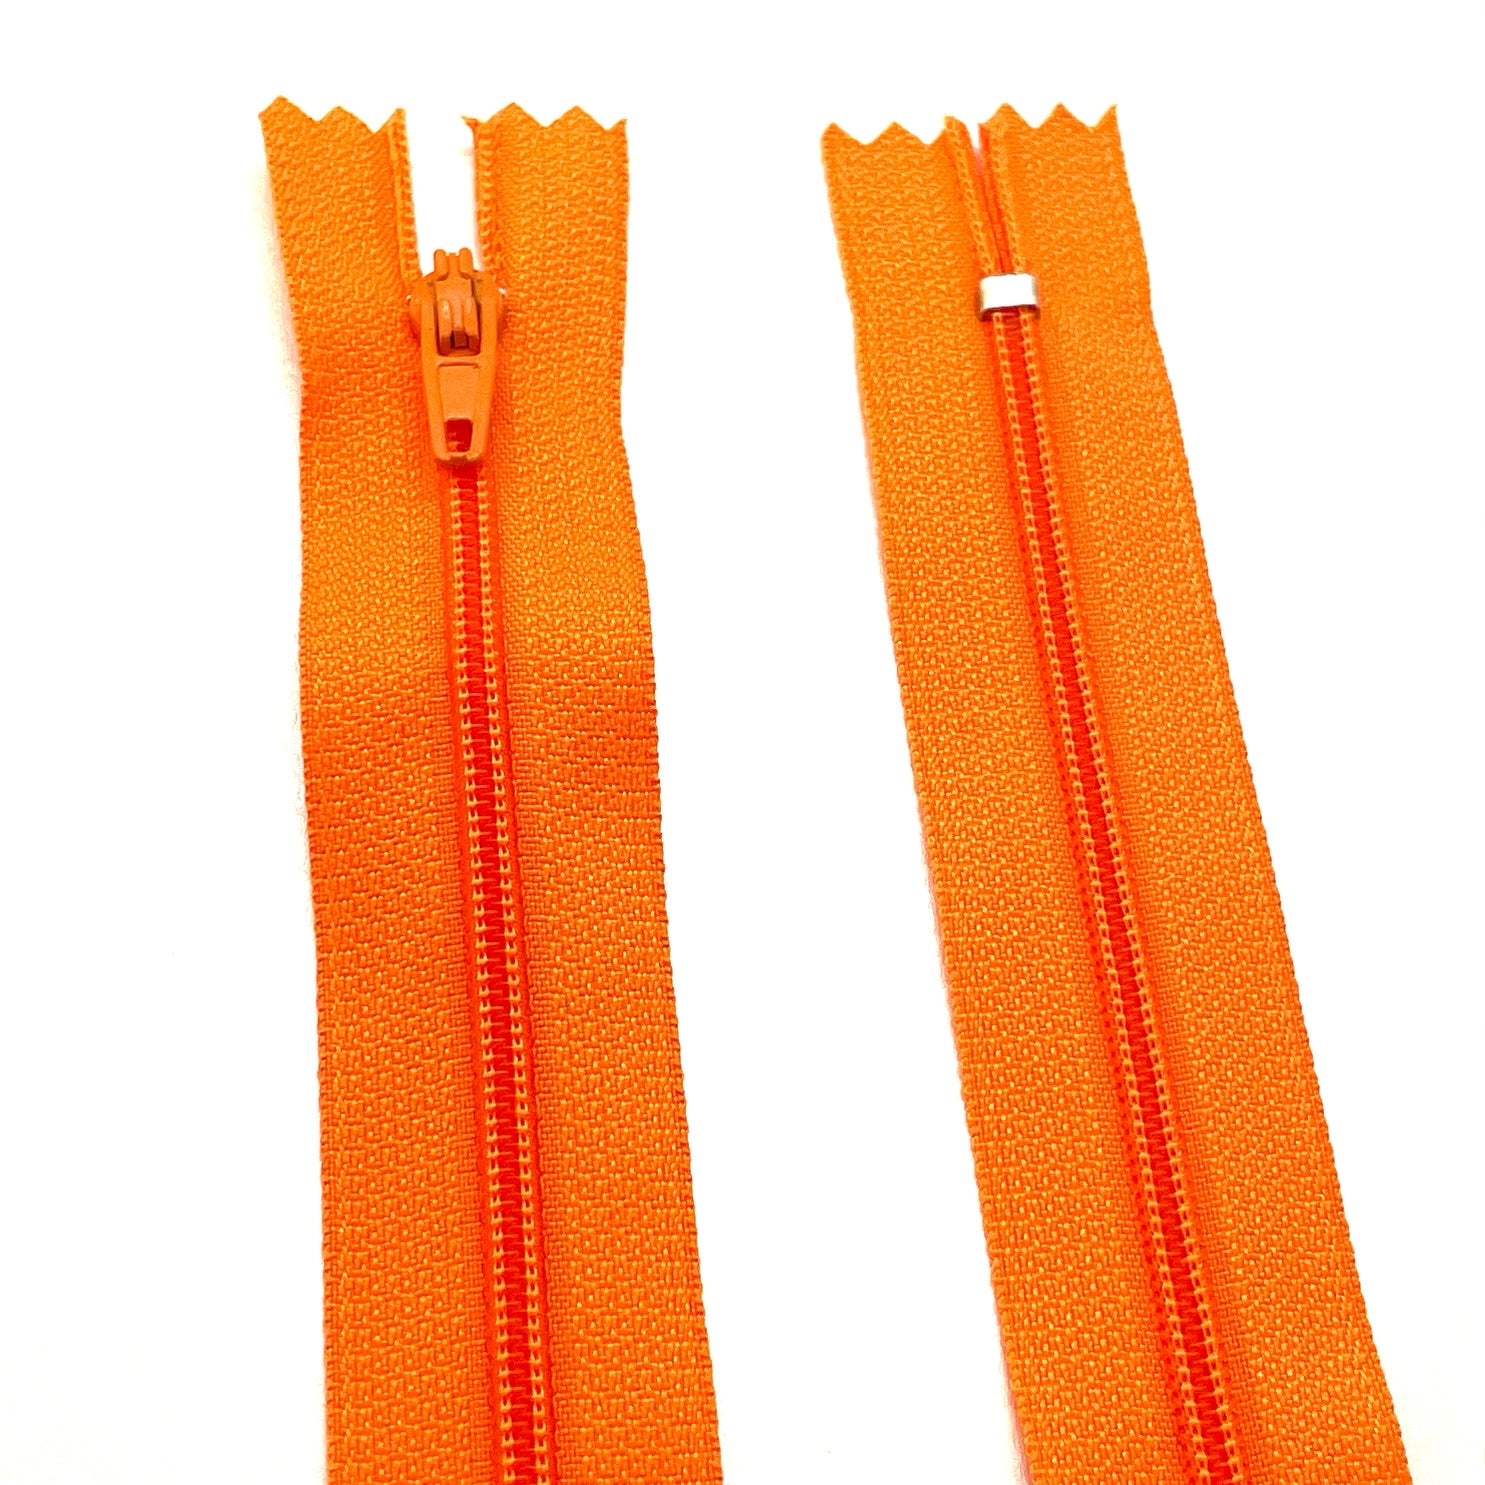 Photo of orange nylon zips available in 25 colors and 5 sizes. Excellent quality zippers for craft and dressmaking purposes. Perfect for dresses, skirts, trousers, bags, purses, cushions, and numerous other projects. So many possibilities, so little time!